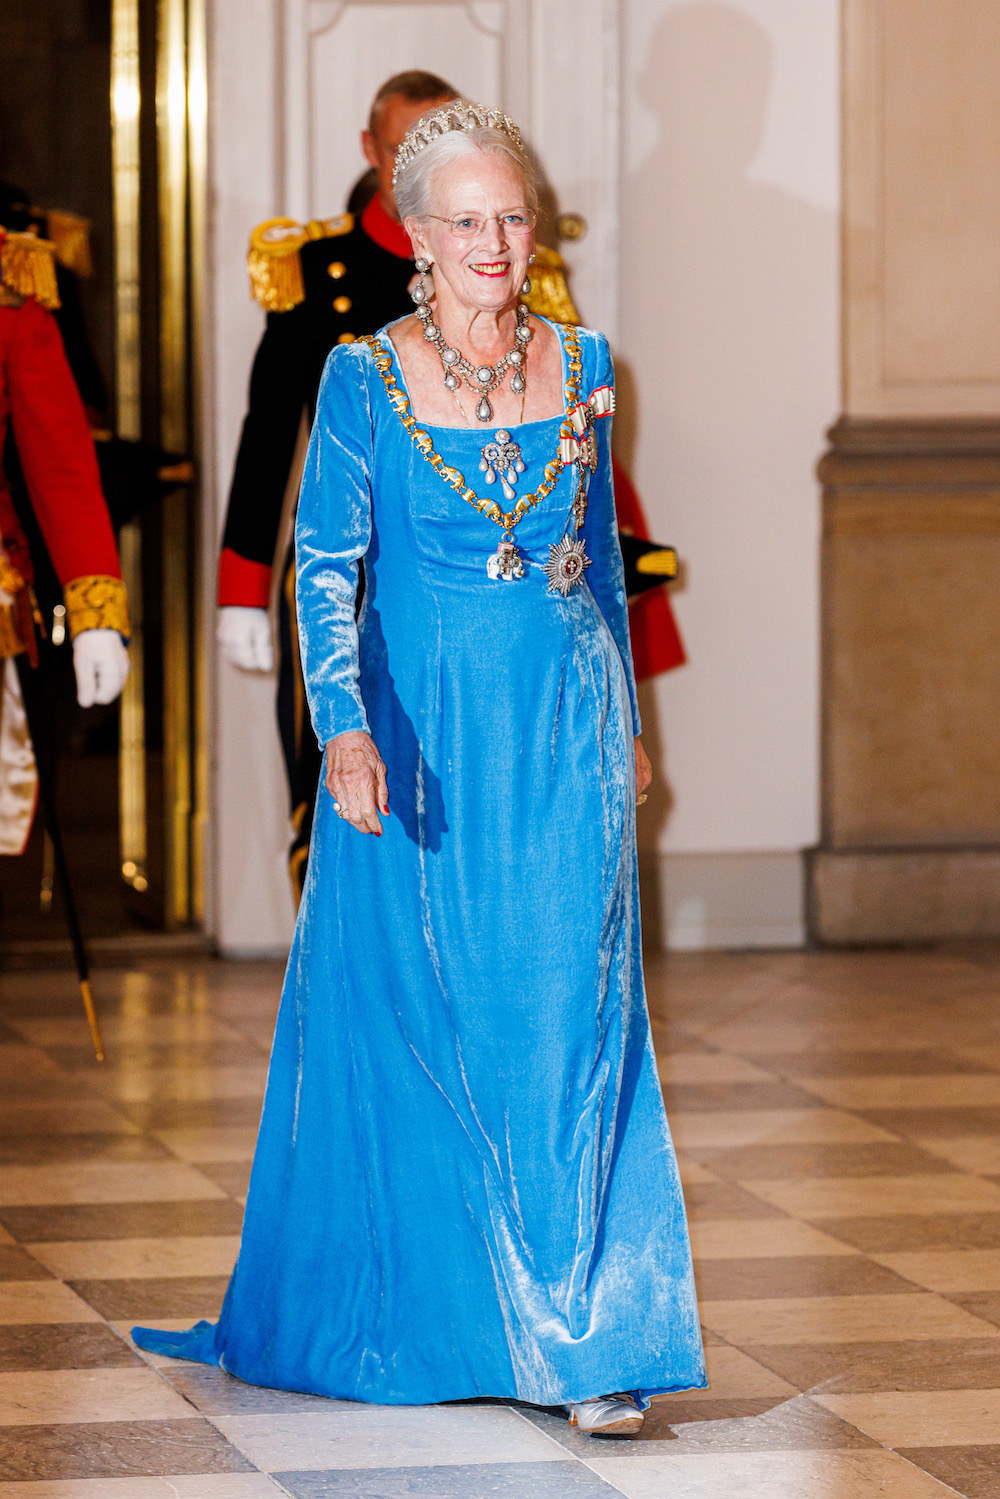 the queen smiling and walking